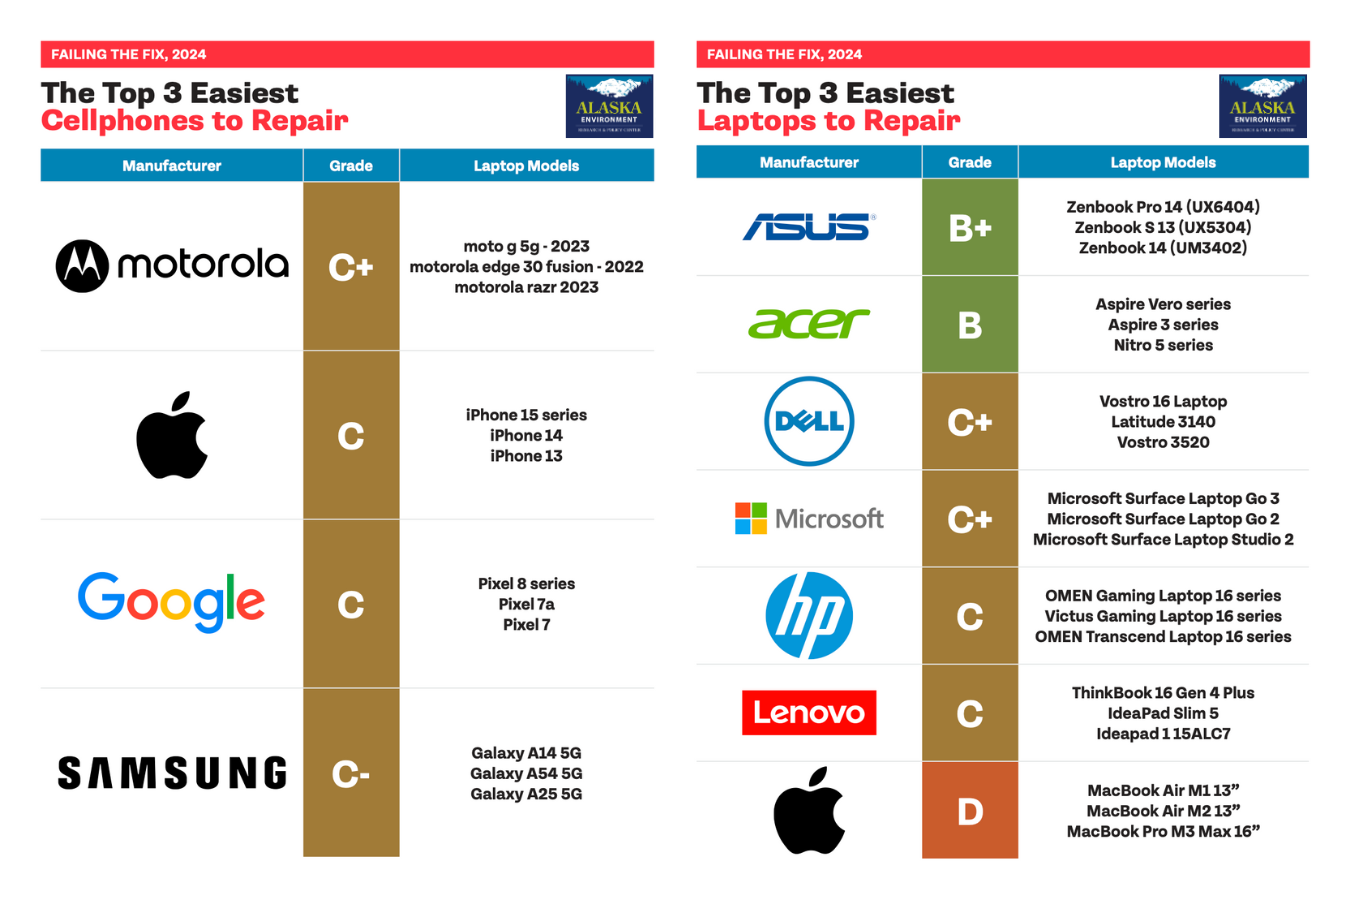 A laptop and cellphone repairability scorecard. For laptops, ASUS gets a B+ (Models: Zenbook Pro14, S13, and 14), acer gets a B (Models: Aspire Vero series, Aspire 3 series, and Nitro 5 series), DELL gets a C+ (Models Vostro 16 Laptop, Latitude 3140, and Vostro 3520), Microsoft gets a C+ (Models: Surface Laptop Go 3, Go 2, and Studio 2), HP gets a C (Model: OMEN Gaming Laptop 16 series, Victus Gaming Laptop 16 series, OMEN Transcend Laptop 16 series), Lenovo gets a C (Model: ThinkBook 16 Gen 4 Plus, IdeaPad Slim 5, and Ideapad 1 15ALC7), and Apple gets a D (MacBook Air M1, M2, and Pro M3). For cellphones, motorola gets a C+ (Models: moto g 5g 2023, motorola edge 30 fusion 2022, motorola razr 2023), Apple gets a C (Models 15, 14, and 13), Google gets a C (Models: Pixel 8, 7a, and 7), and Samsung gets a C- (Galaxy A14, A54, and A25).